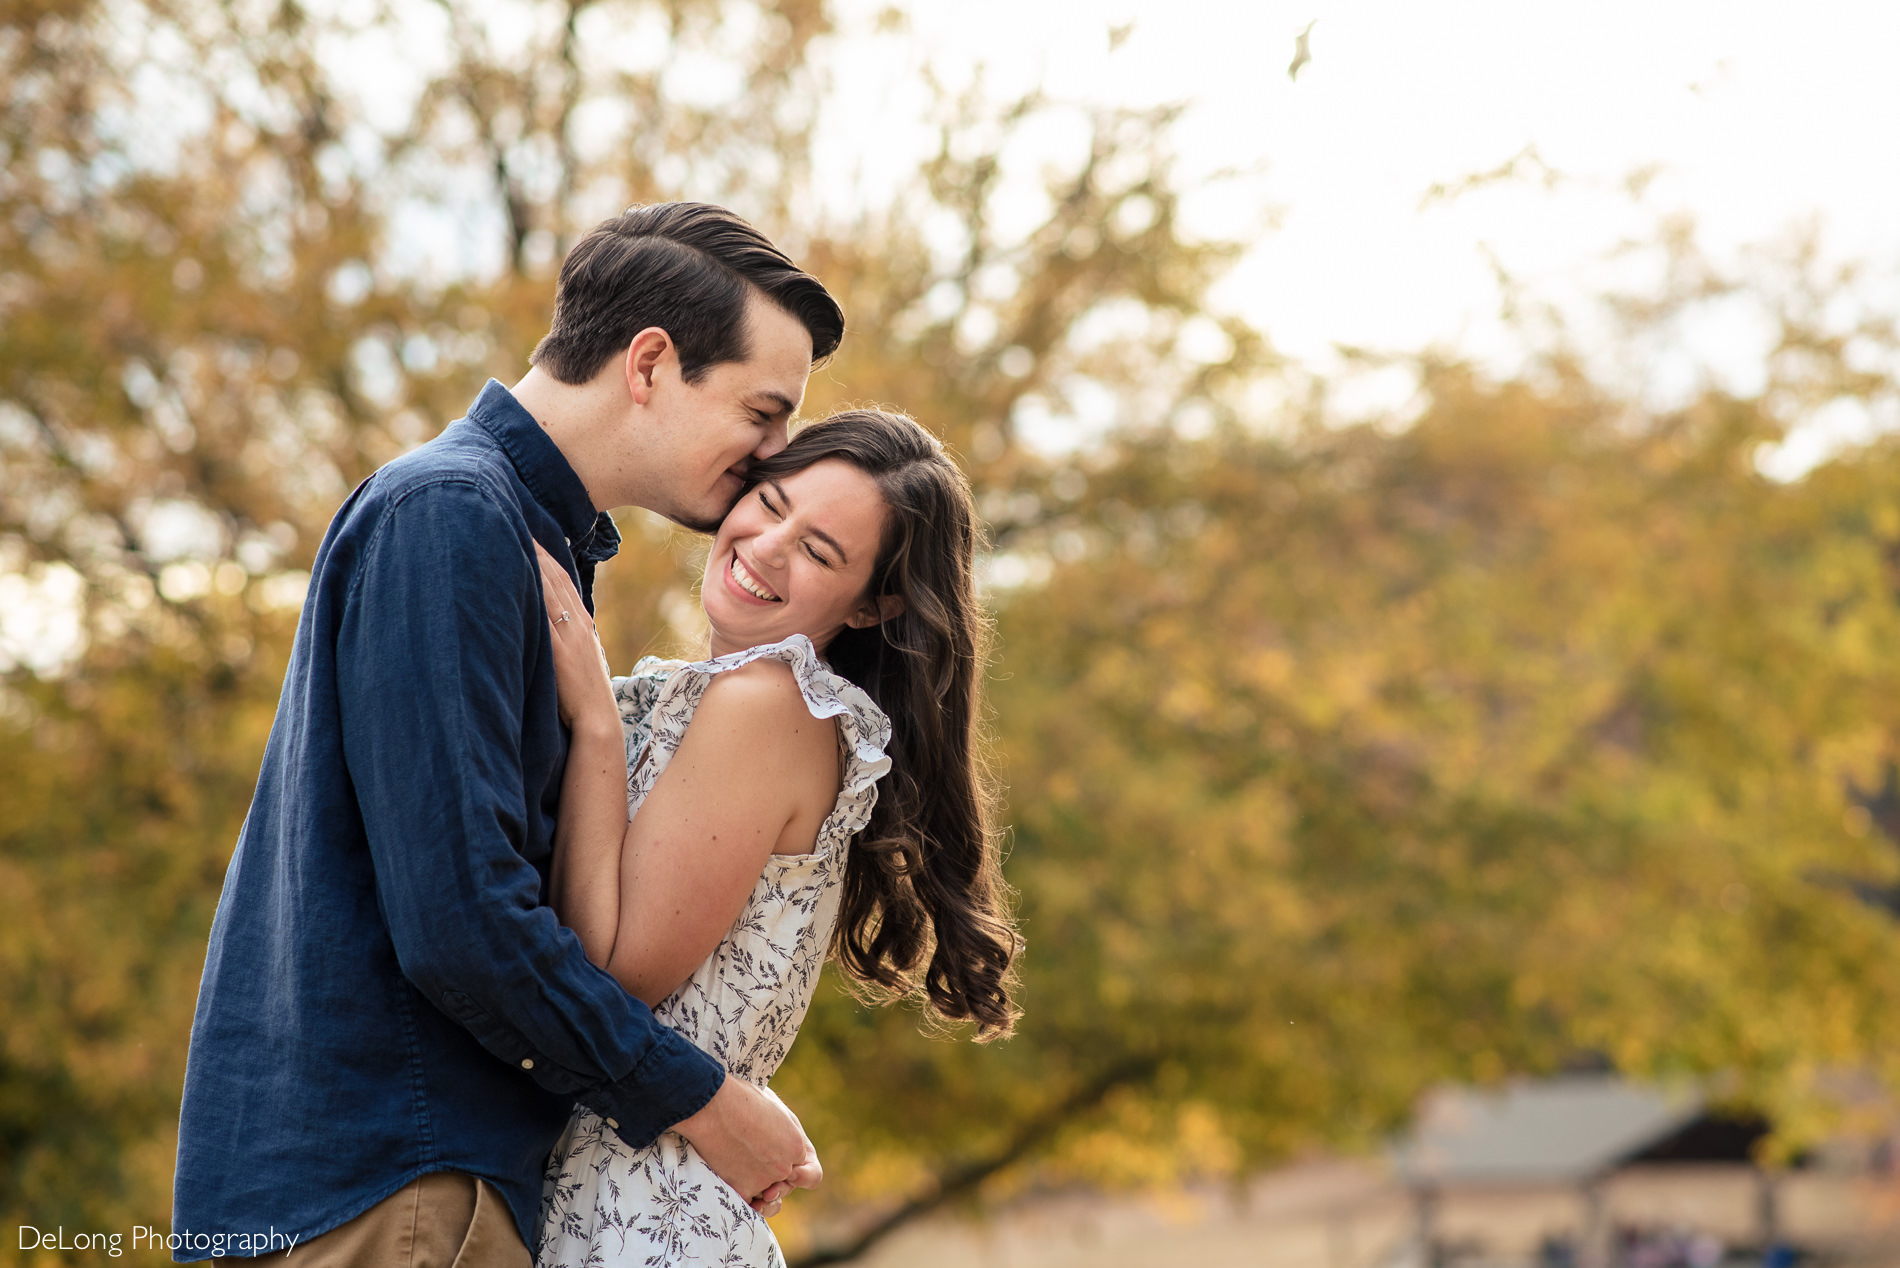 Giggling engaged couple portrait outside at a Freedom park in Charlotte, NC by Charlotte Wedding Photographers DeLong Photography